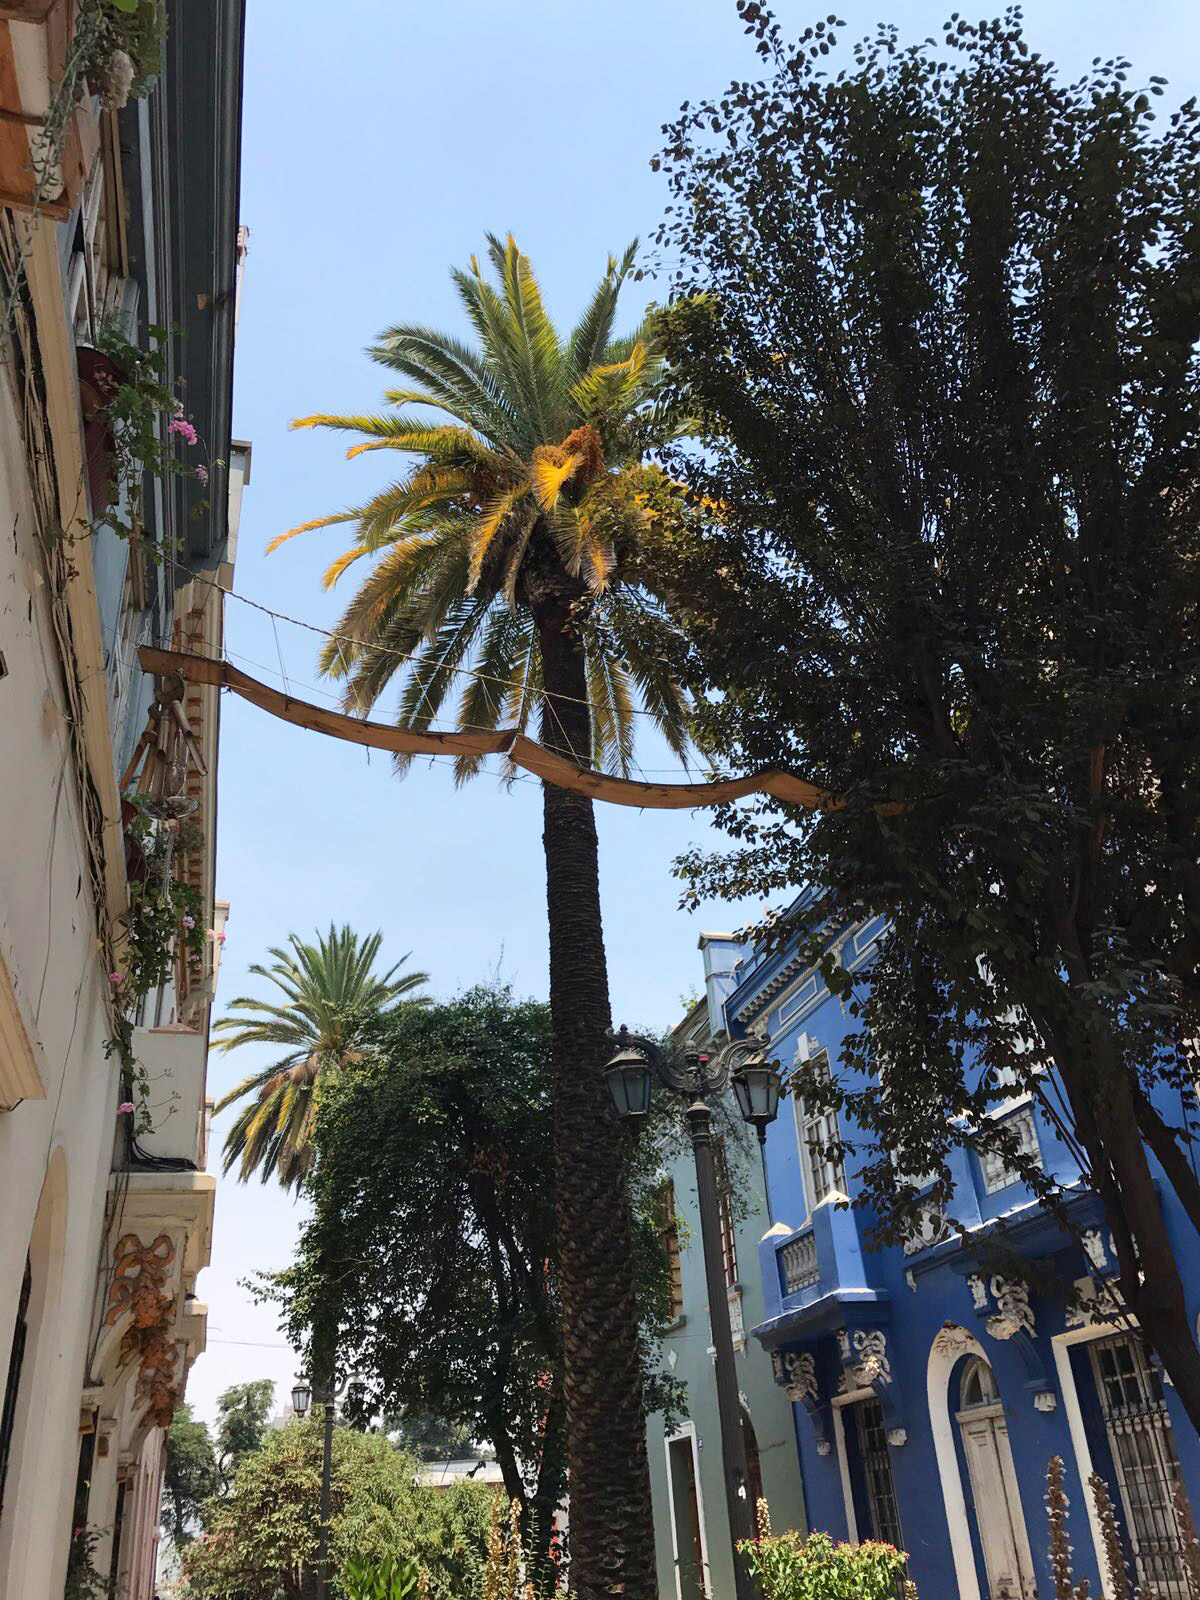 A literal catwalk extends between someone's home and a tree in Barrio Yungay.